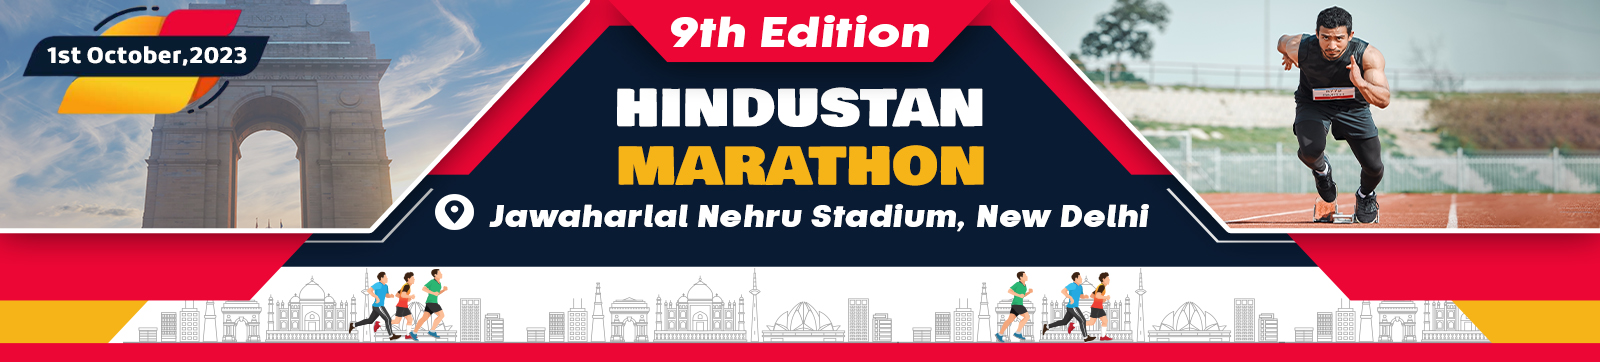 Fun, Excitement, Thrill & Chill – The 9th Edition Hindustan Marathon Awaits Your Presence